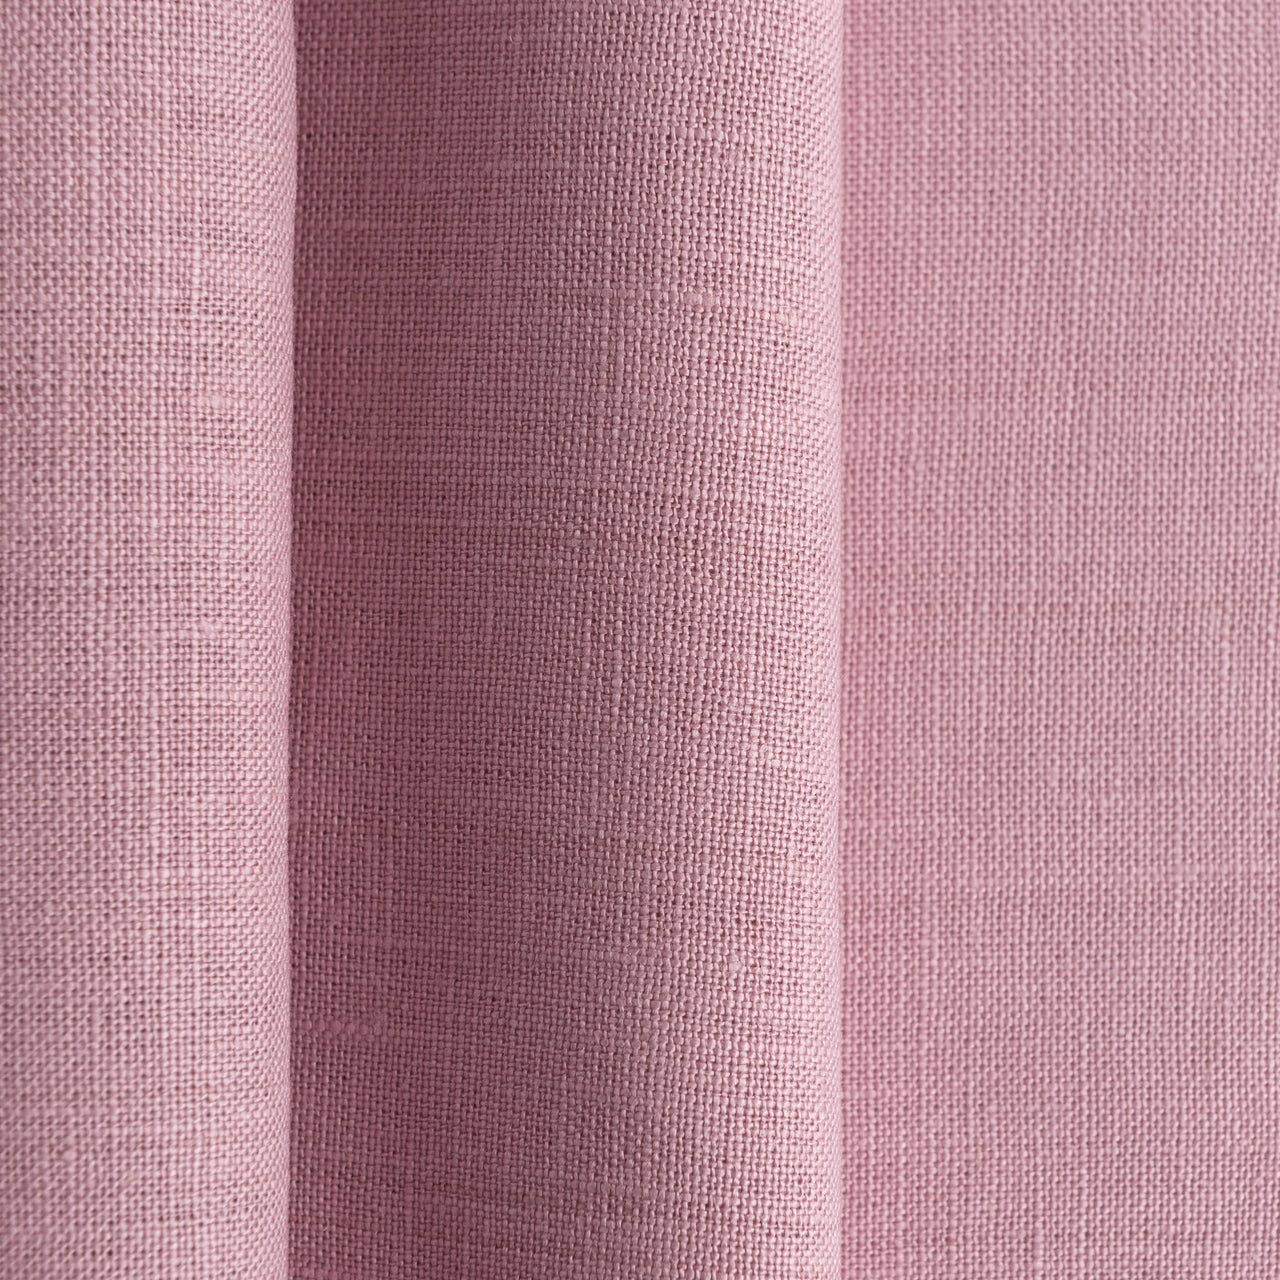 Dusty Rose Linen Fabric by the Meter - 100% French Natural - Width 133 cm, 267 cm